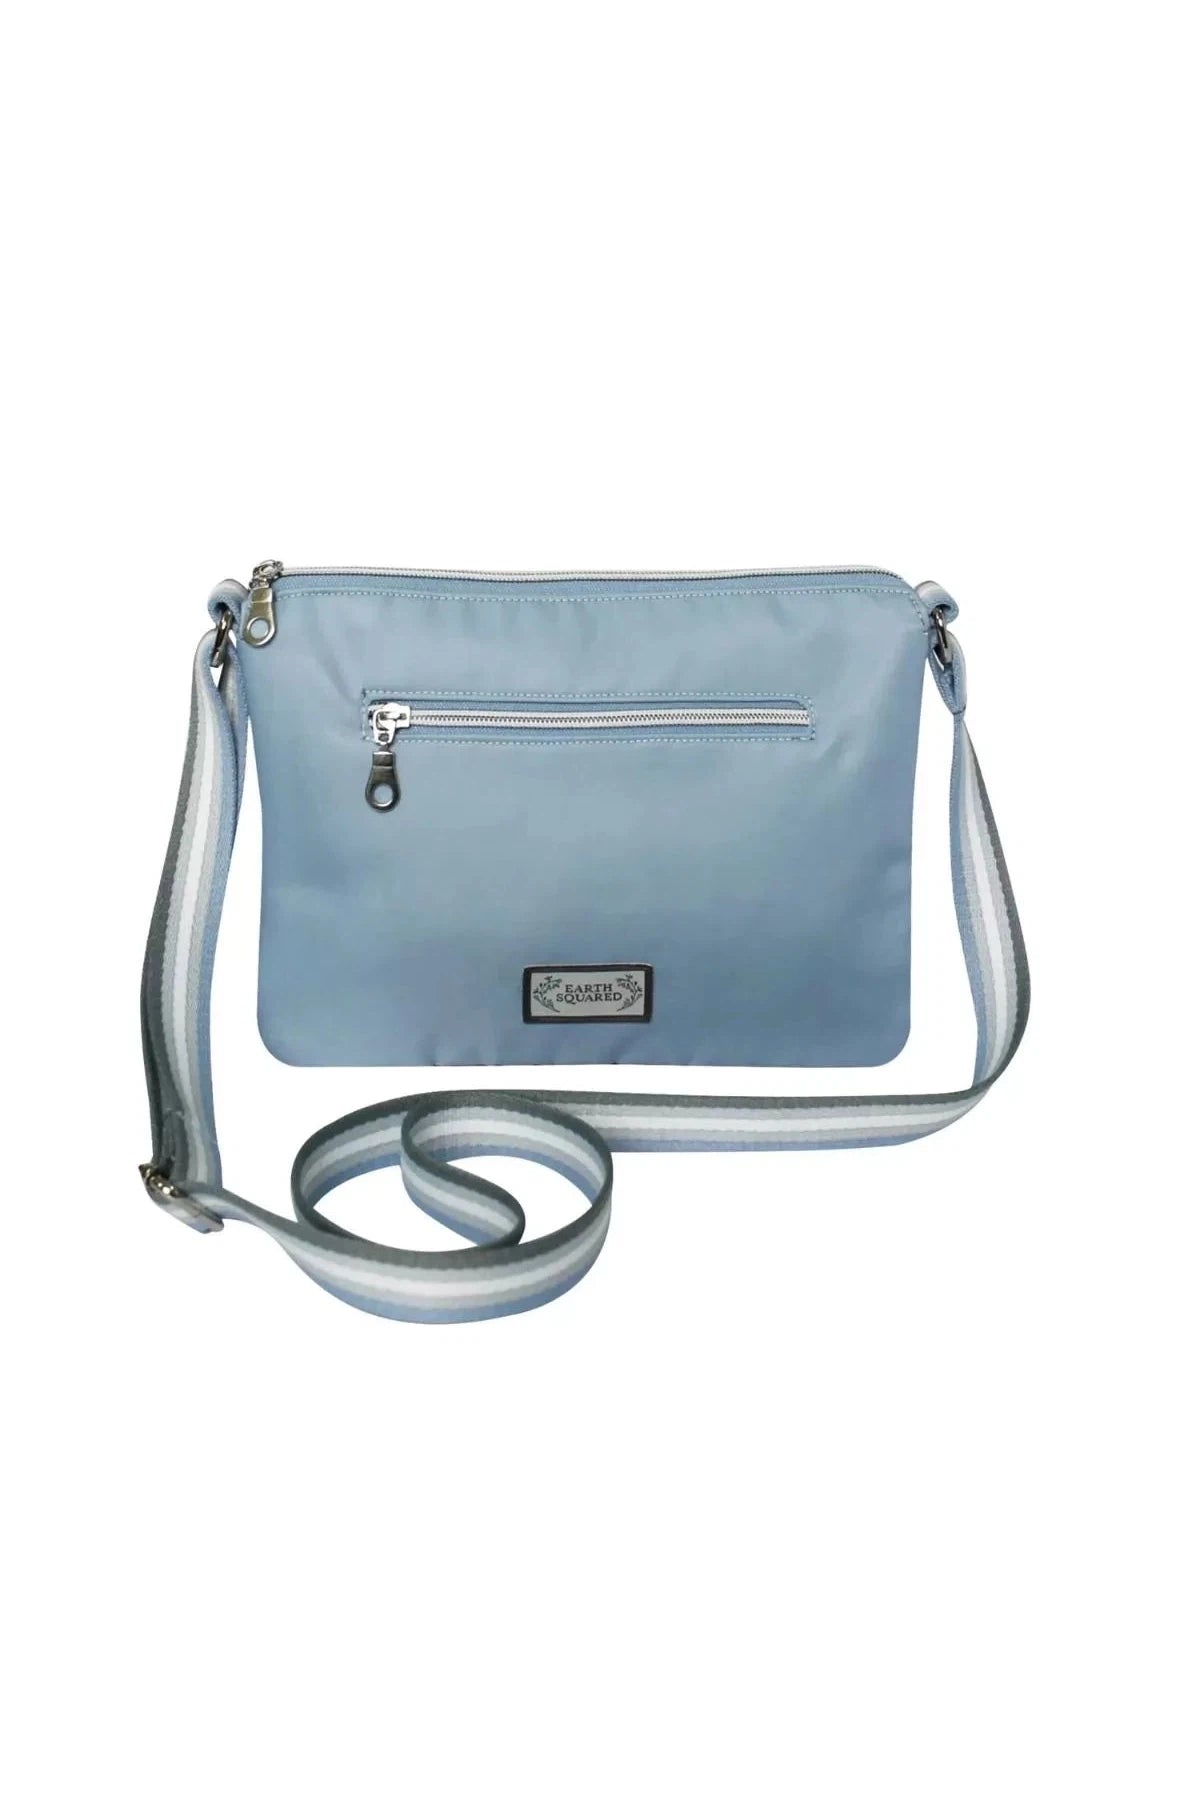 Earth Squared Recycled Voyage Messenger Dusty Blue Bag-Womens-Ohh! By Gum - Shop Sustainable